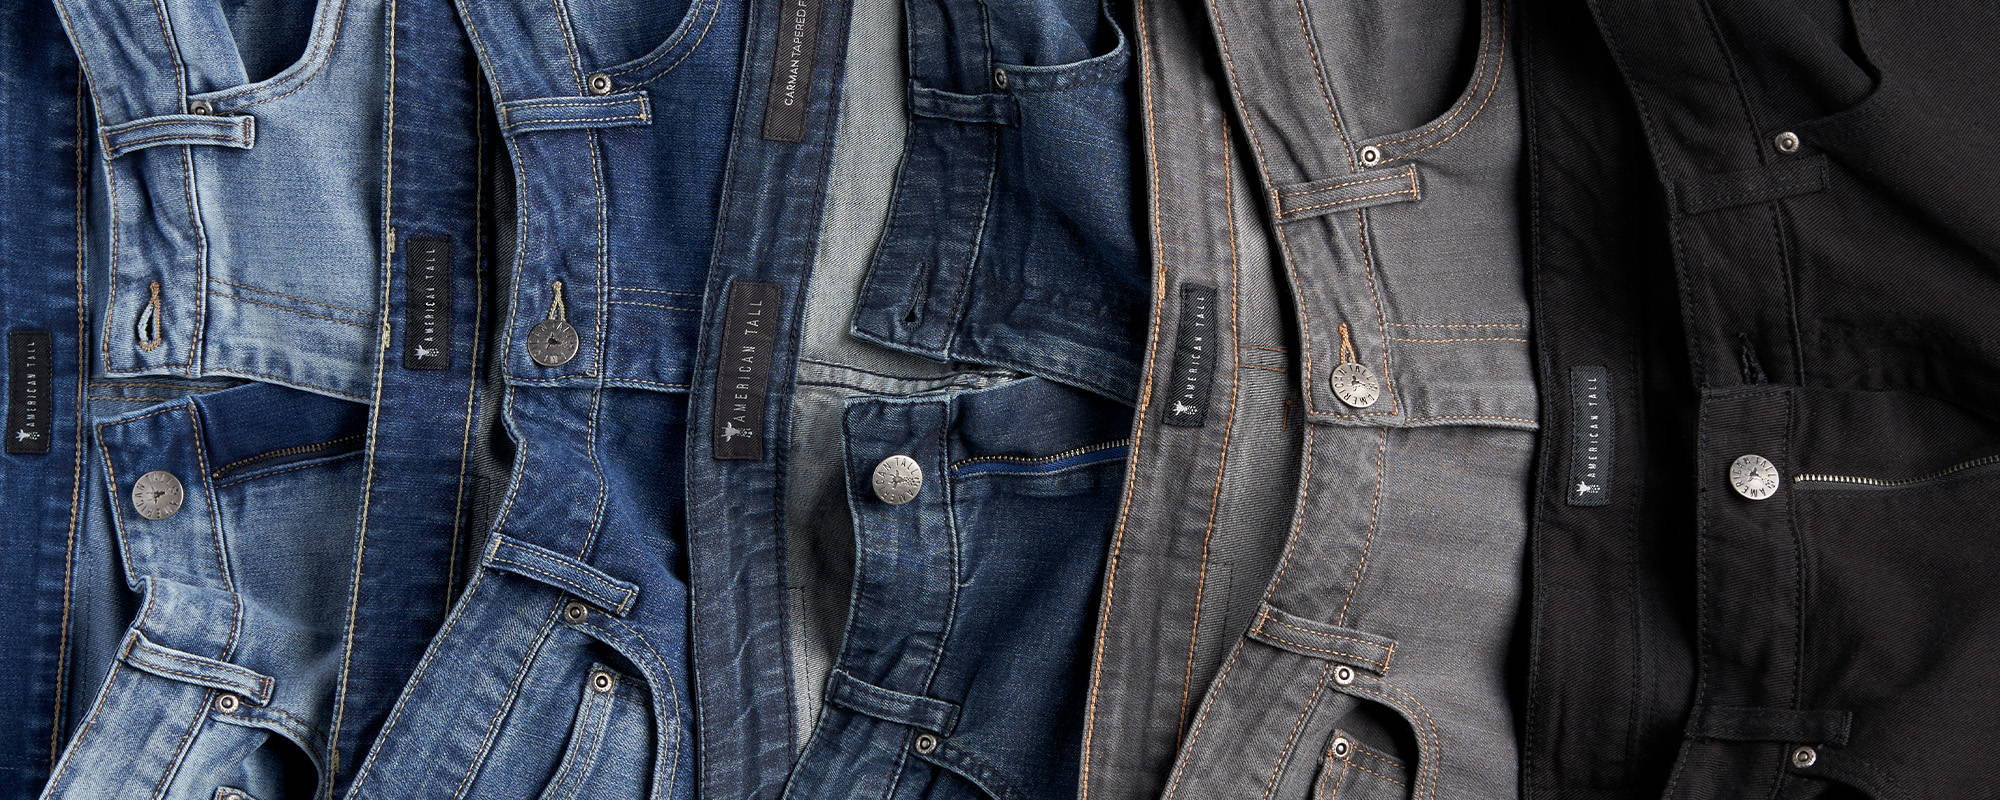 Tall men's jeans layered over top of each other arranged from light blue to black.